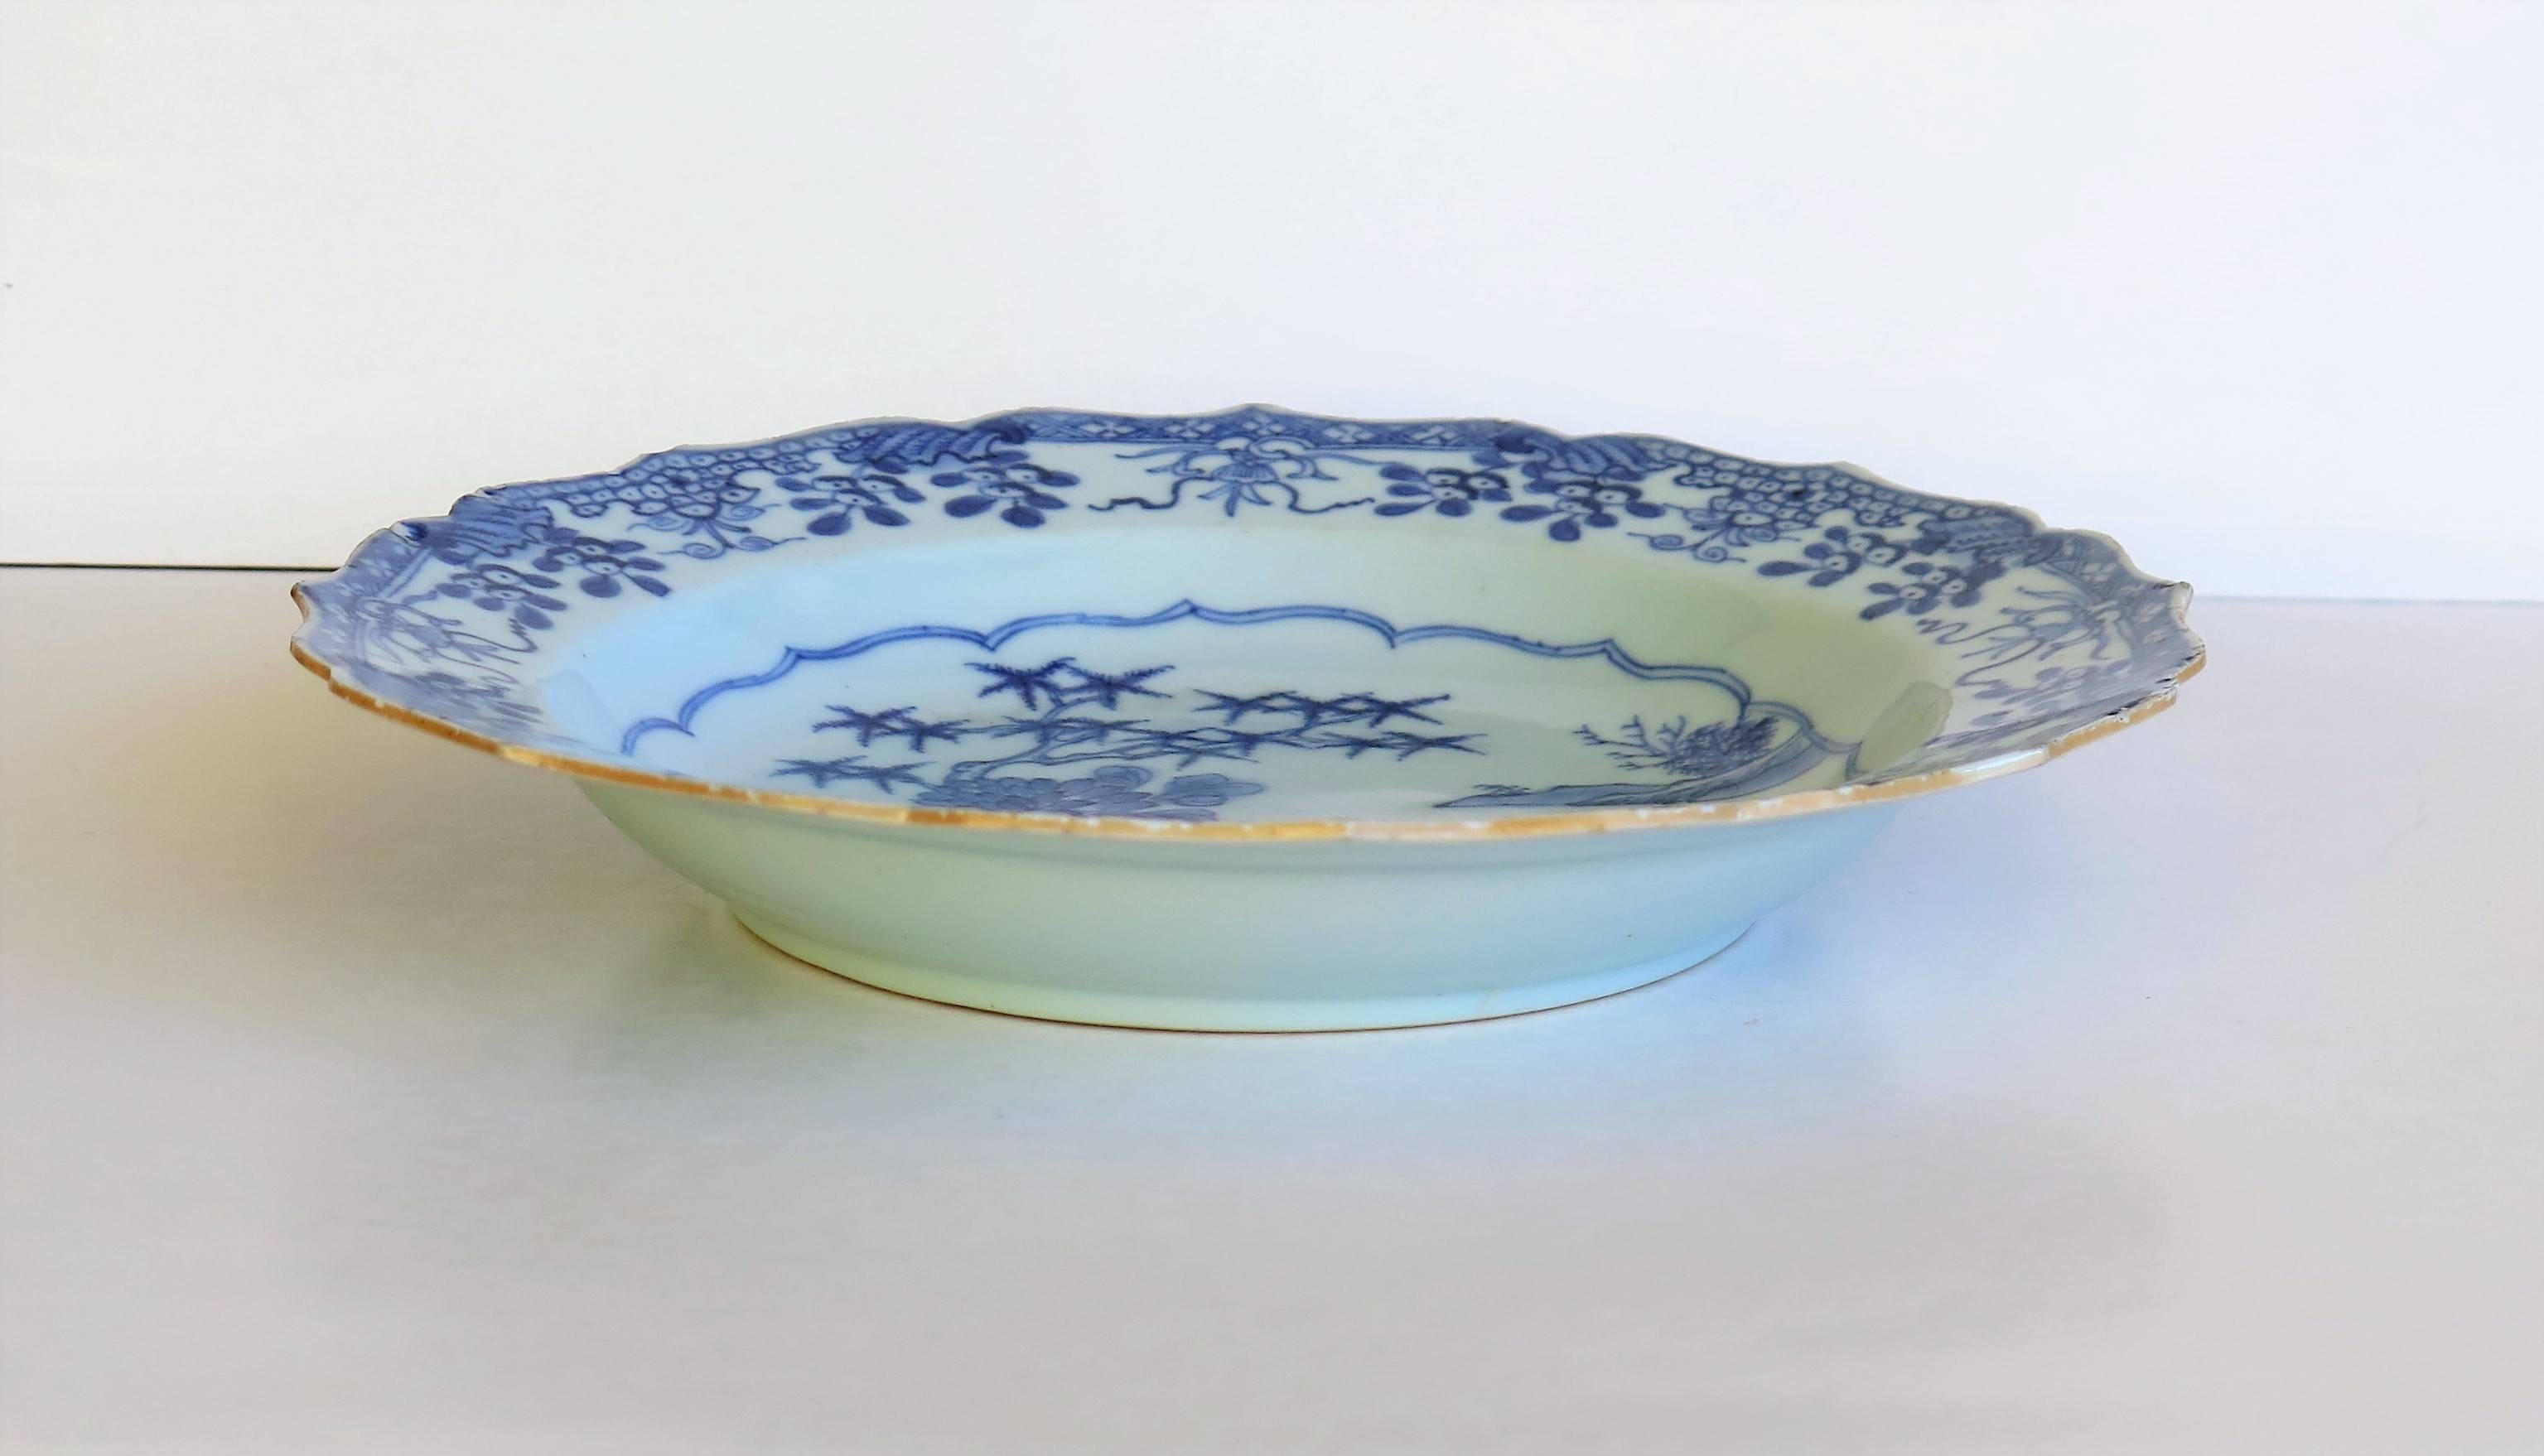 18th Century Chinese Porcelain Plate or Bowl, Blue and White, Woodland Birds, circa 1770